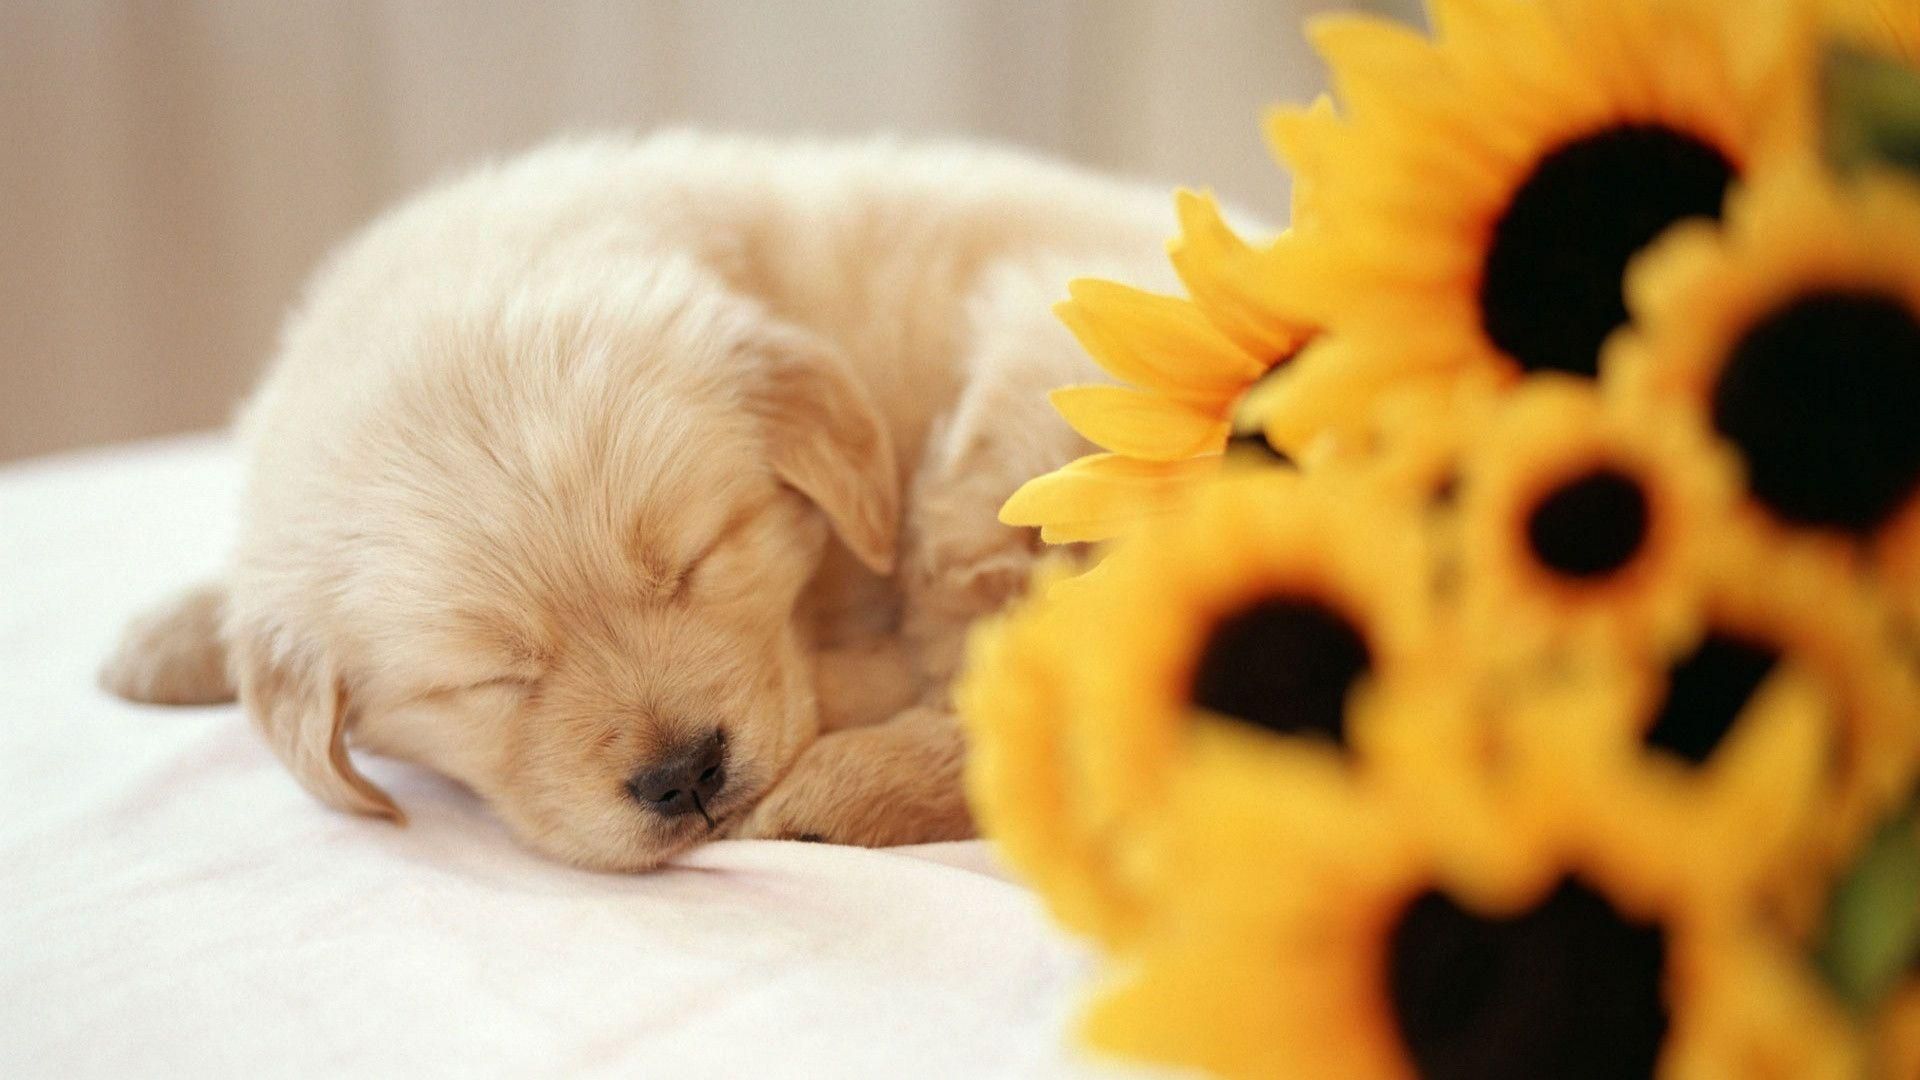 Puppies Free HD Wallpaper and Background Download (54) Puppies Free HD Wallpaper and Background Download. Puppy wallpaper, Puppy background, Sleeping puppies